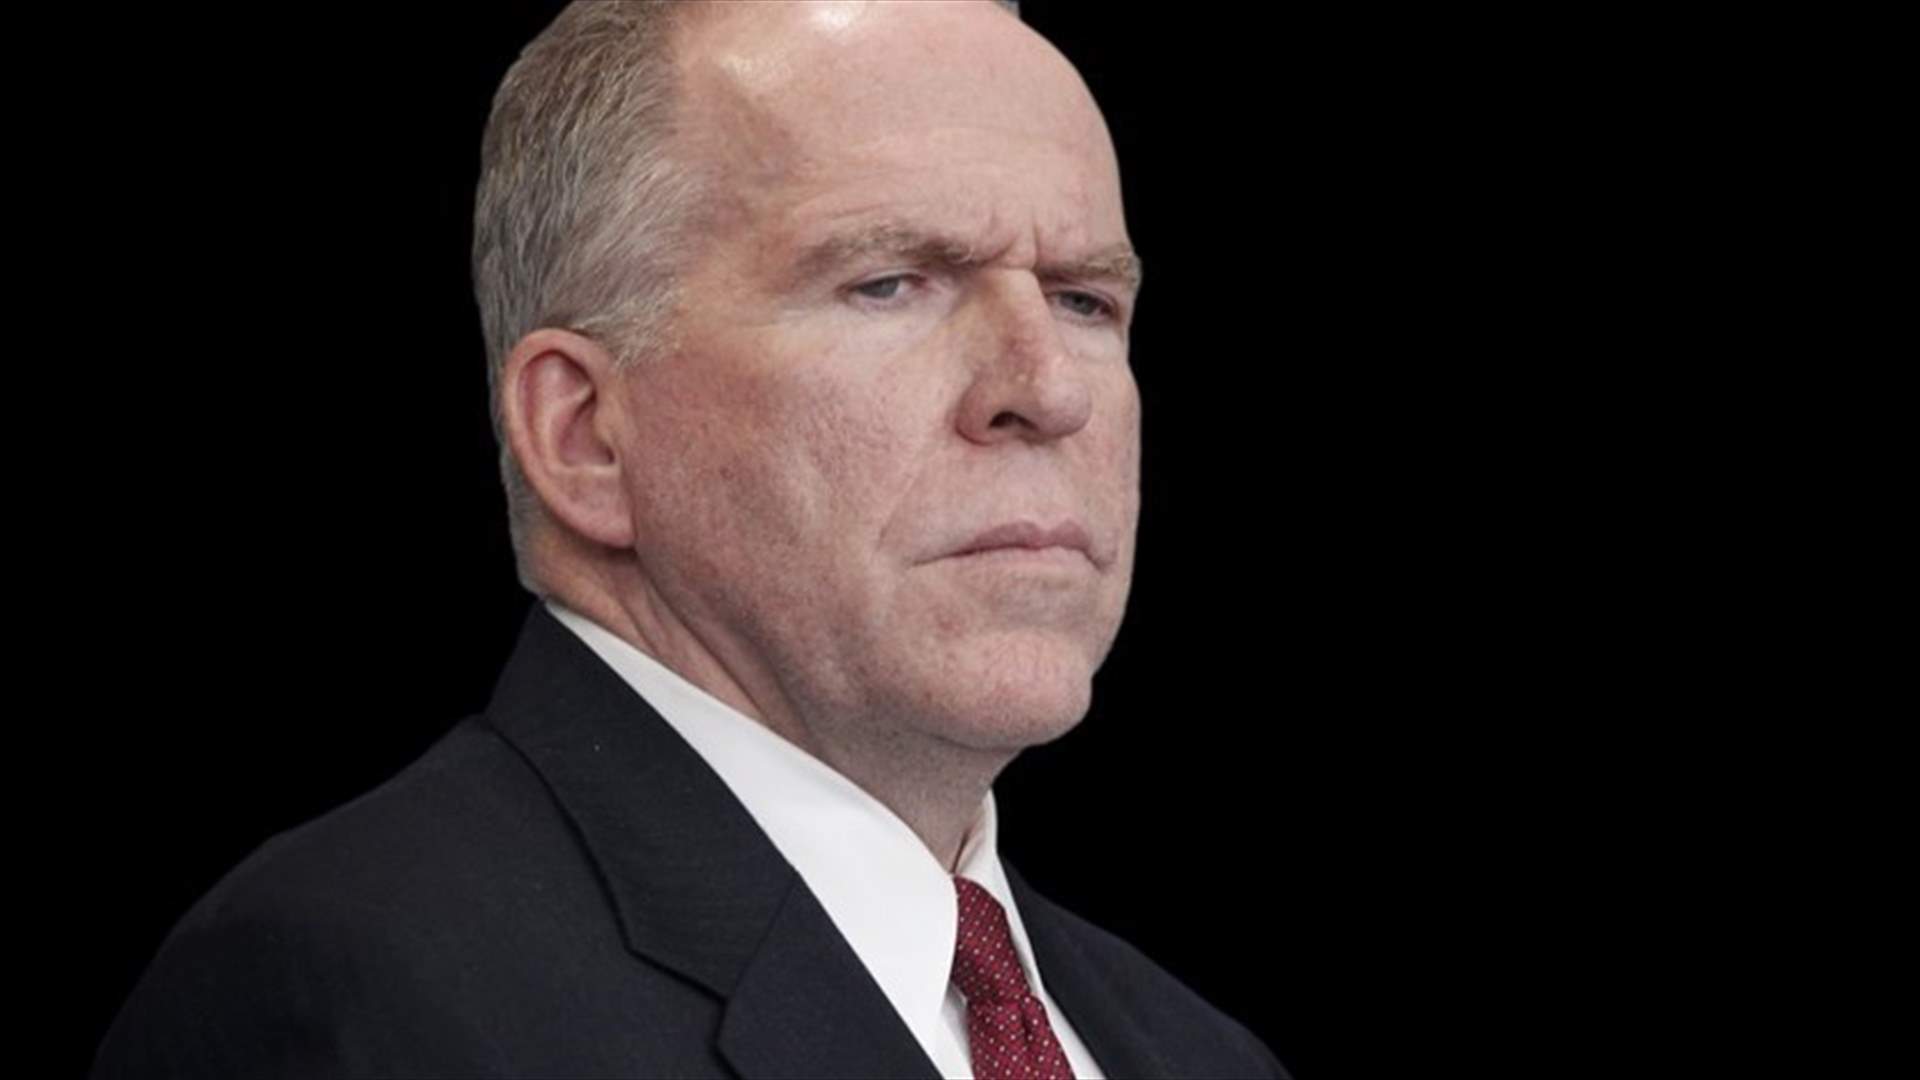 CIA chief: IS working to send operatives to the West